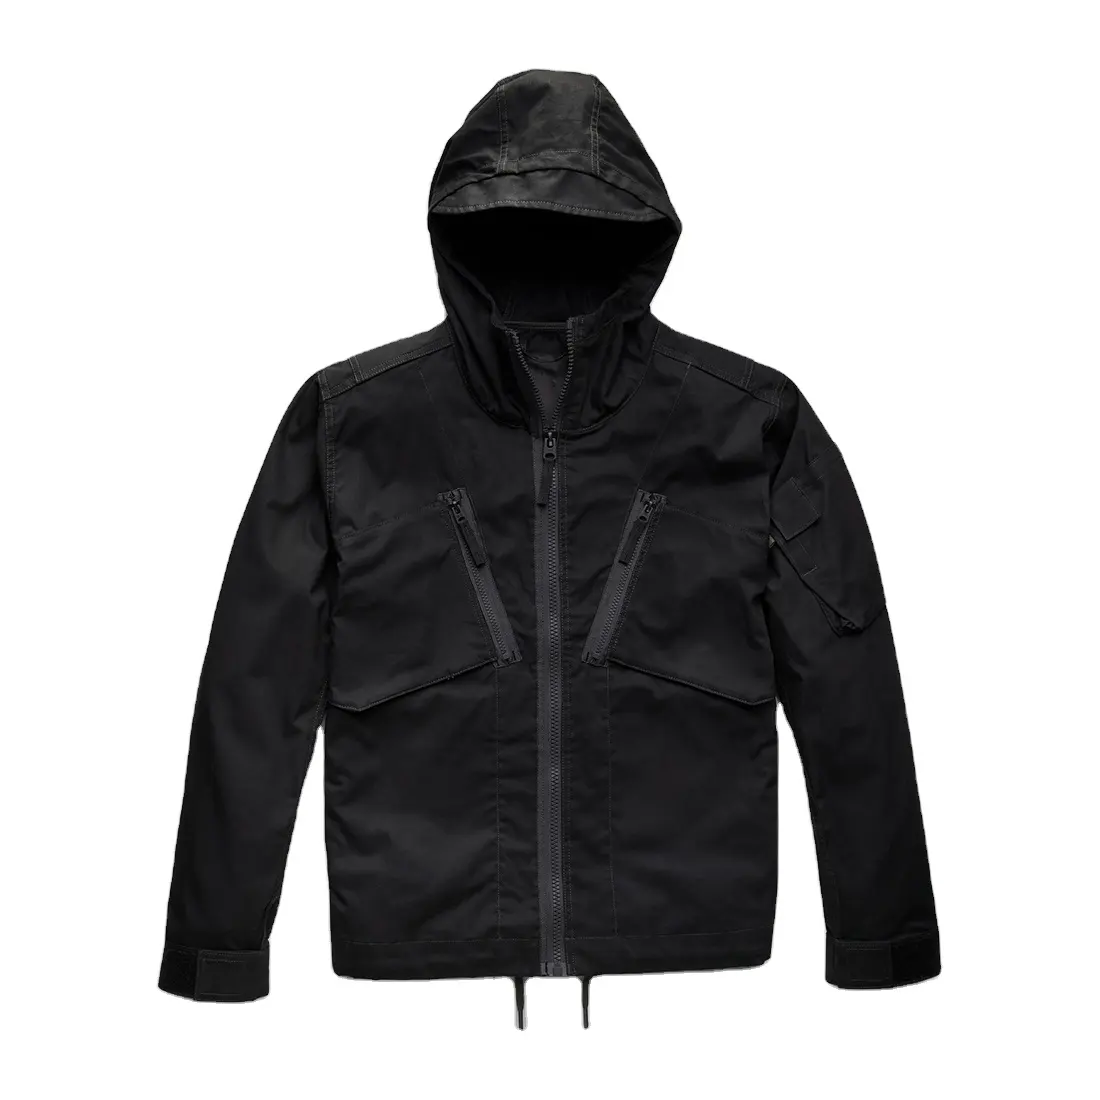 Embrace the Elements with High Performance Wholesale Waterproof Jacket - Stay Dry and Stylish All Winter